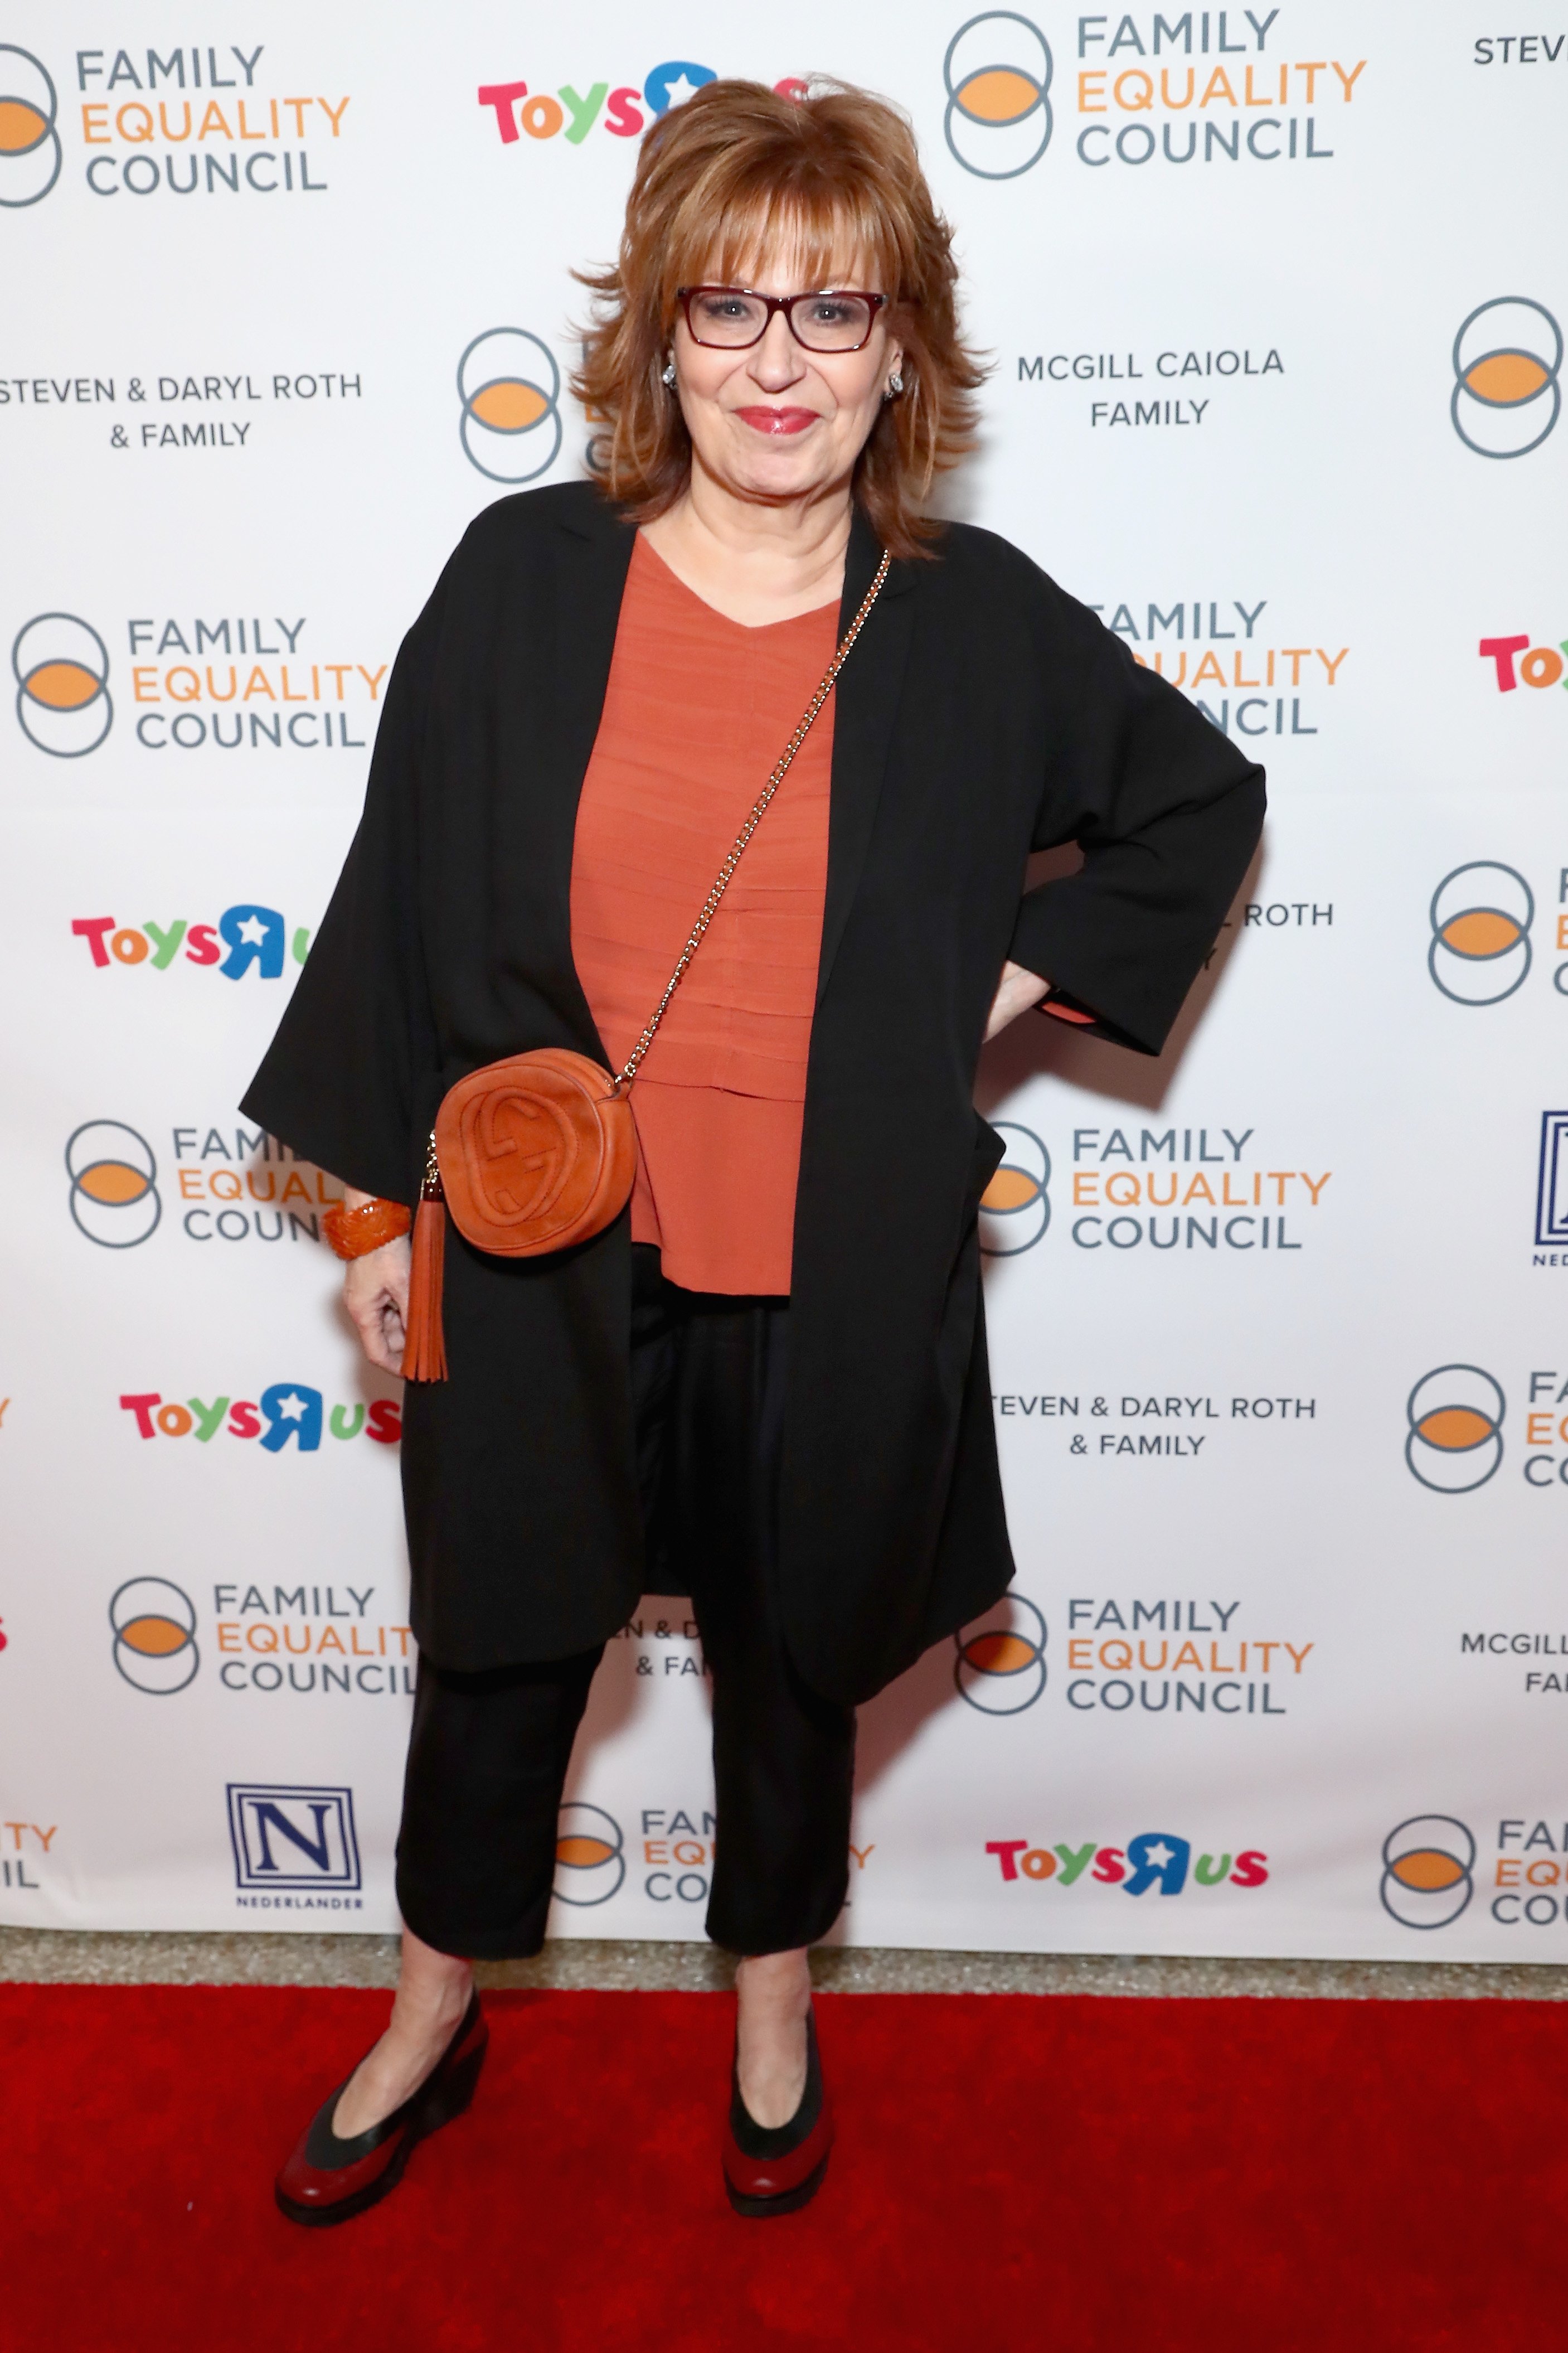  Joy Behar at Family Equality Council's "Night at the Pier" at Pier 60 on May 8, 2017 in New York City. | Source: Getty Images